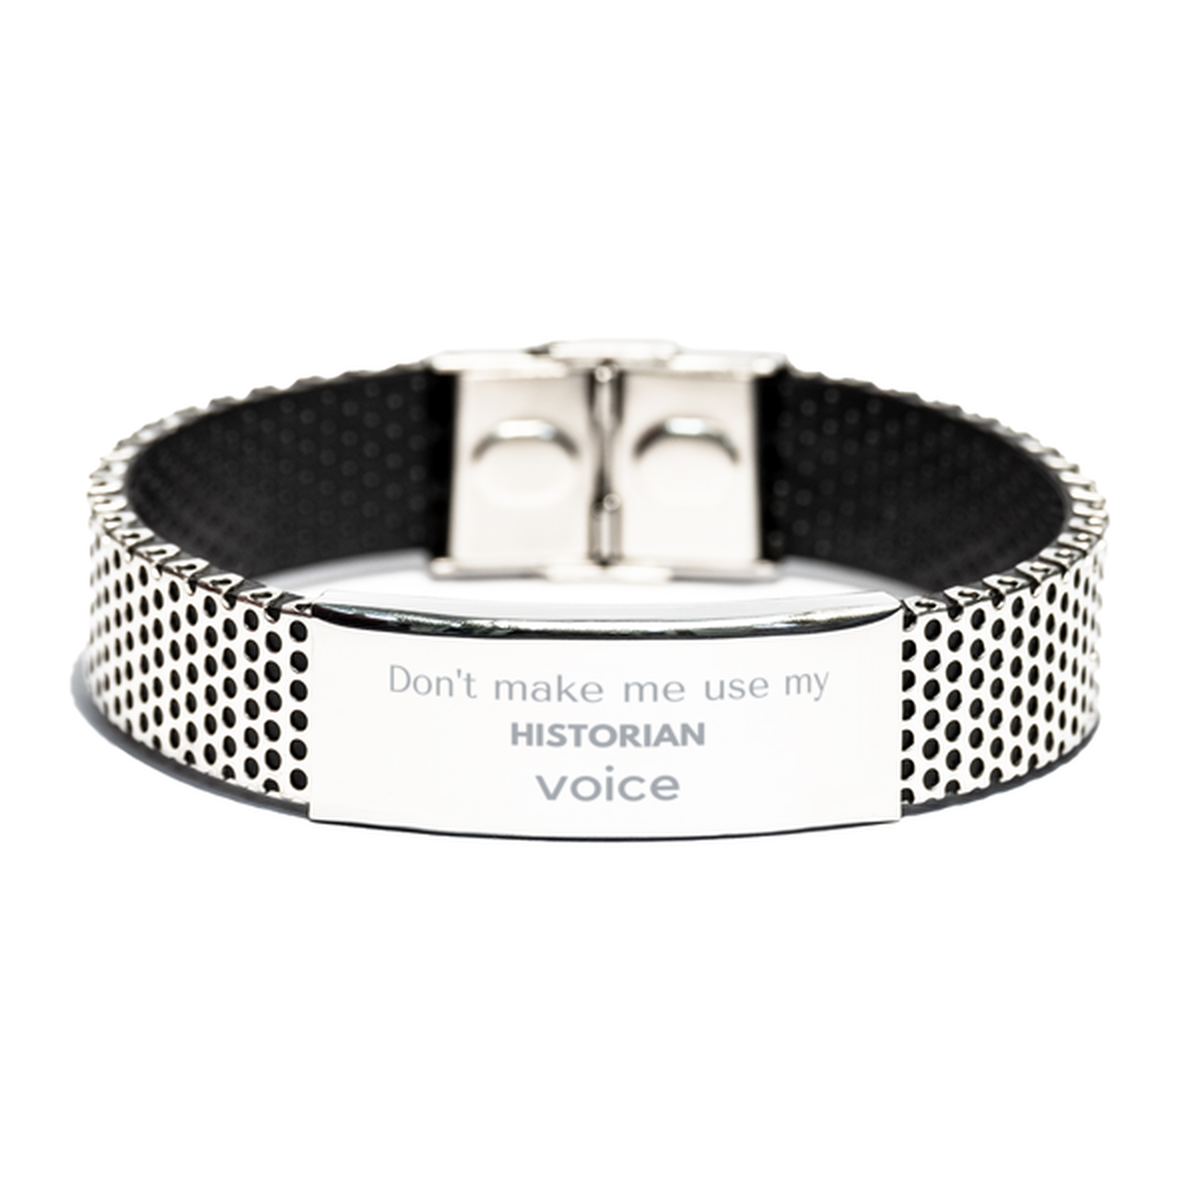 Don't make me use my Historian voice, Sarcasm Historian Gifts, Christmas Historian Stainless Steel Bracelet Birthday Unique Gifts For Historian Coworkers, Men, Women, Colleague, Friends